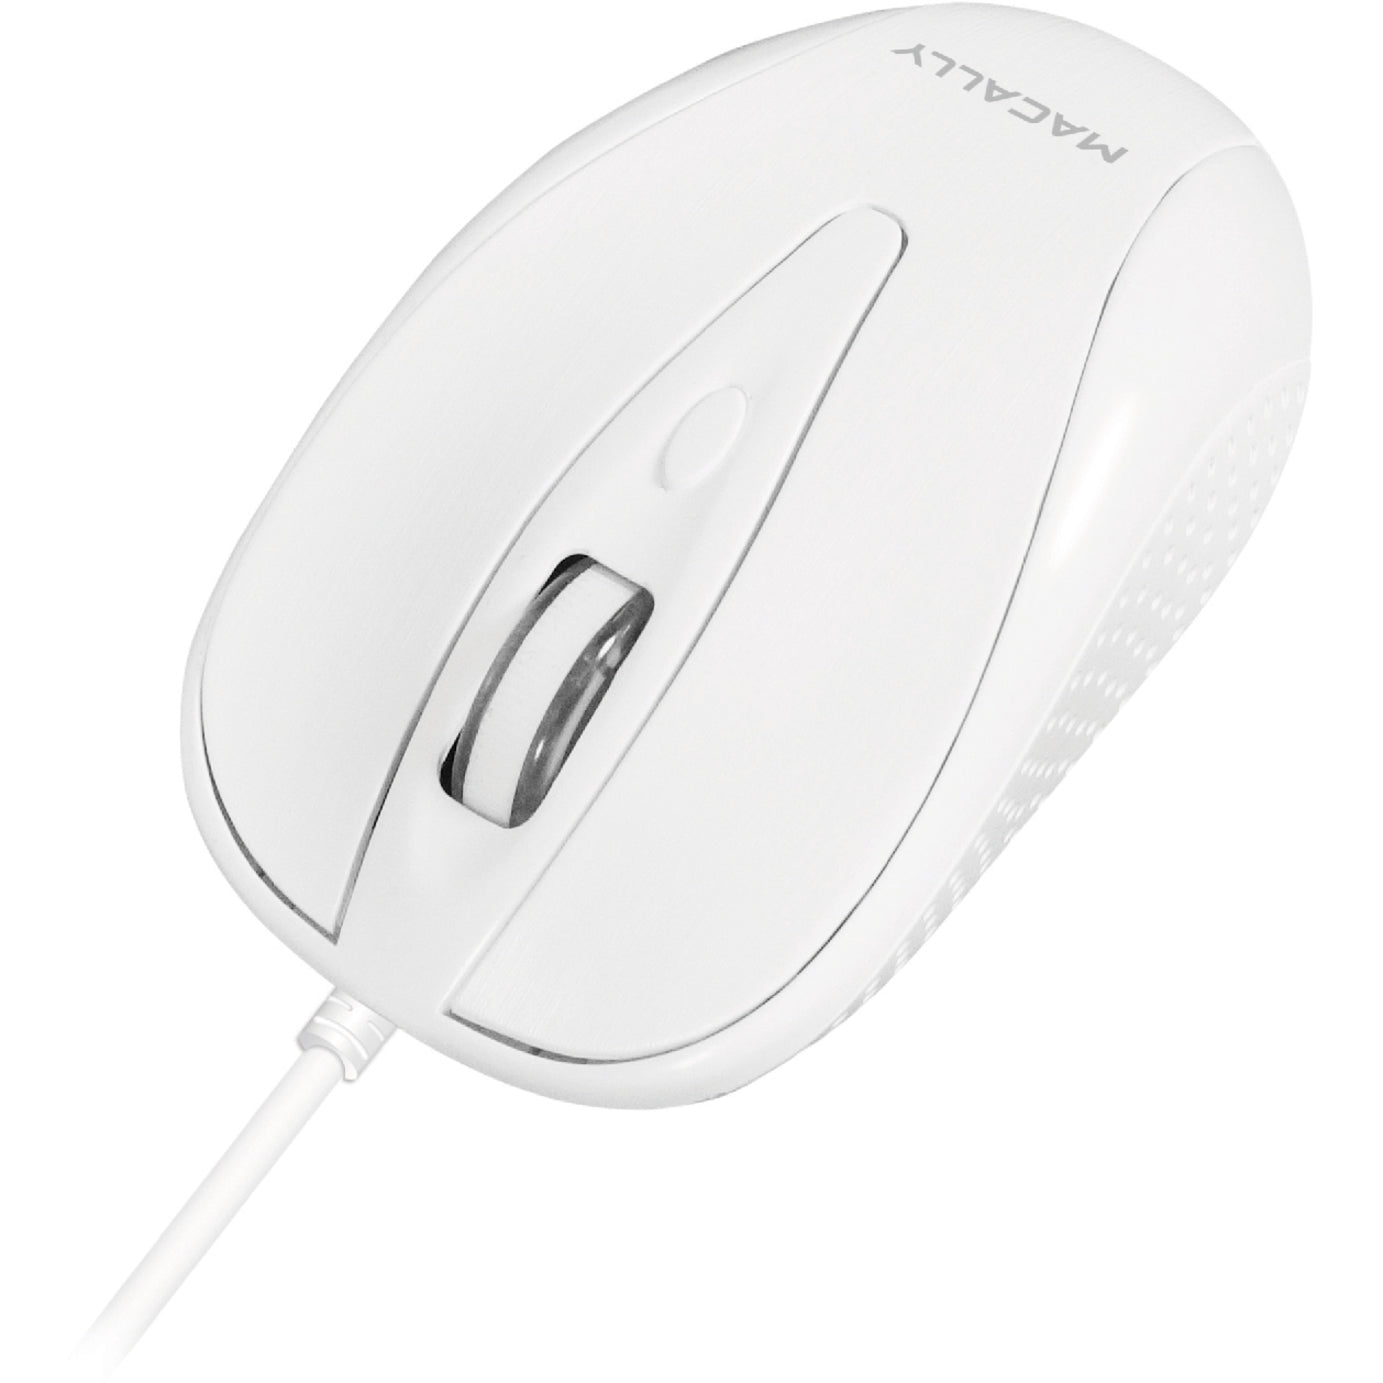 Macally TURBO 3 Button Optical USB Wired Mouse for Mac and PC, Ergonomic Fit, 1000 dpi, Scroll Wheel